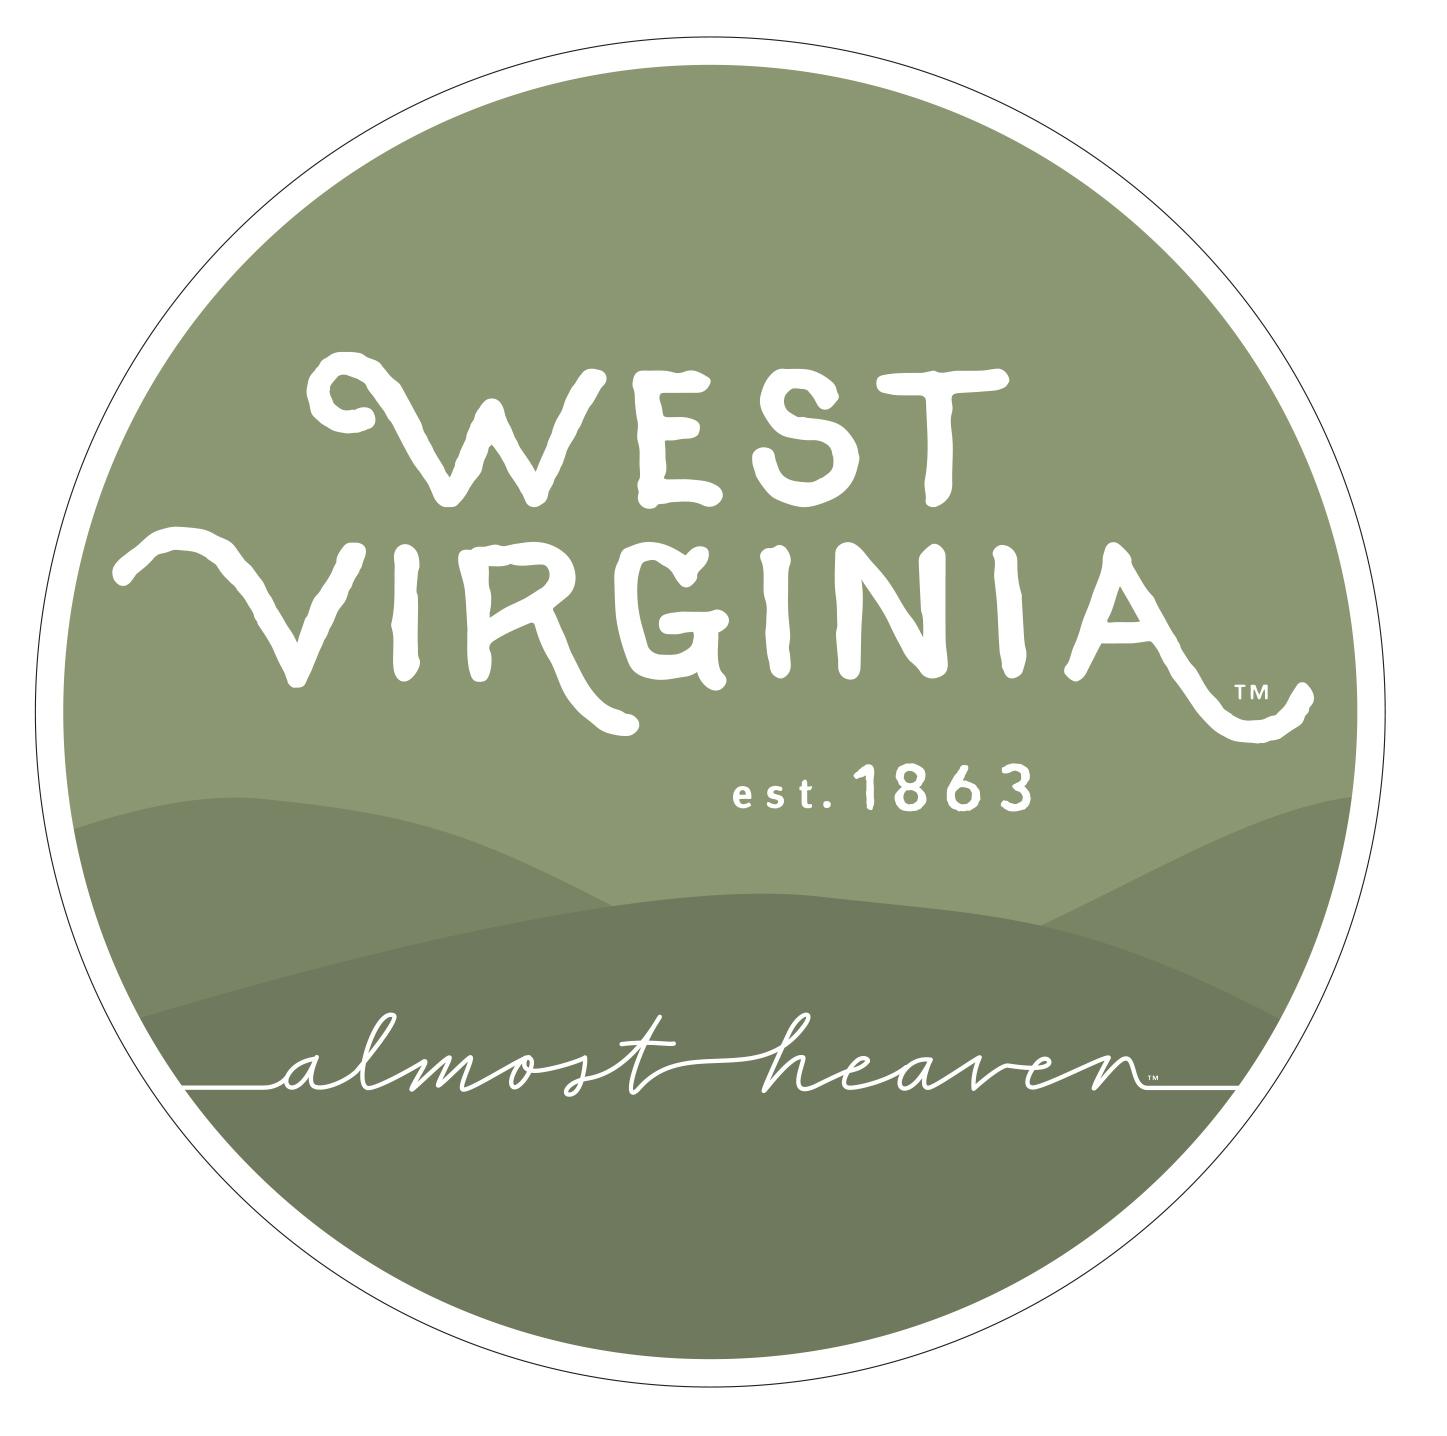 Almost Heaven West Virginia Logo - Join in West Virginia's 155th Birthday Celebration Heaven